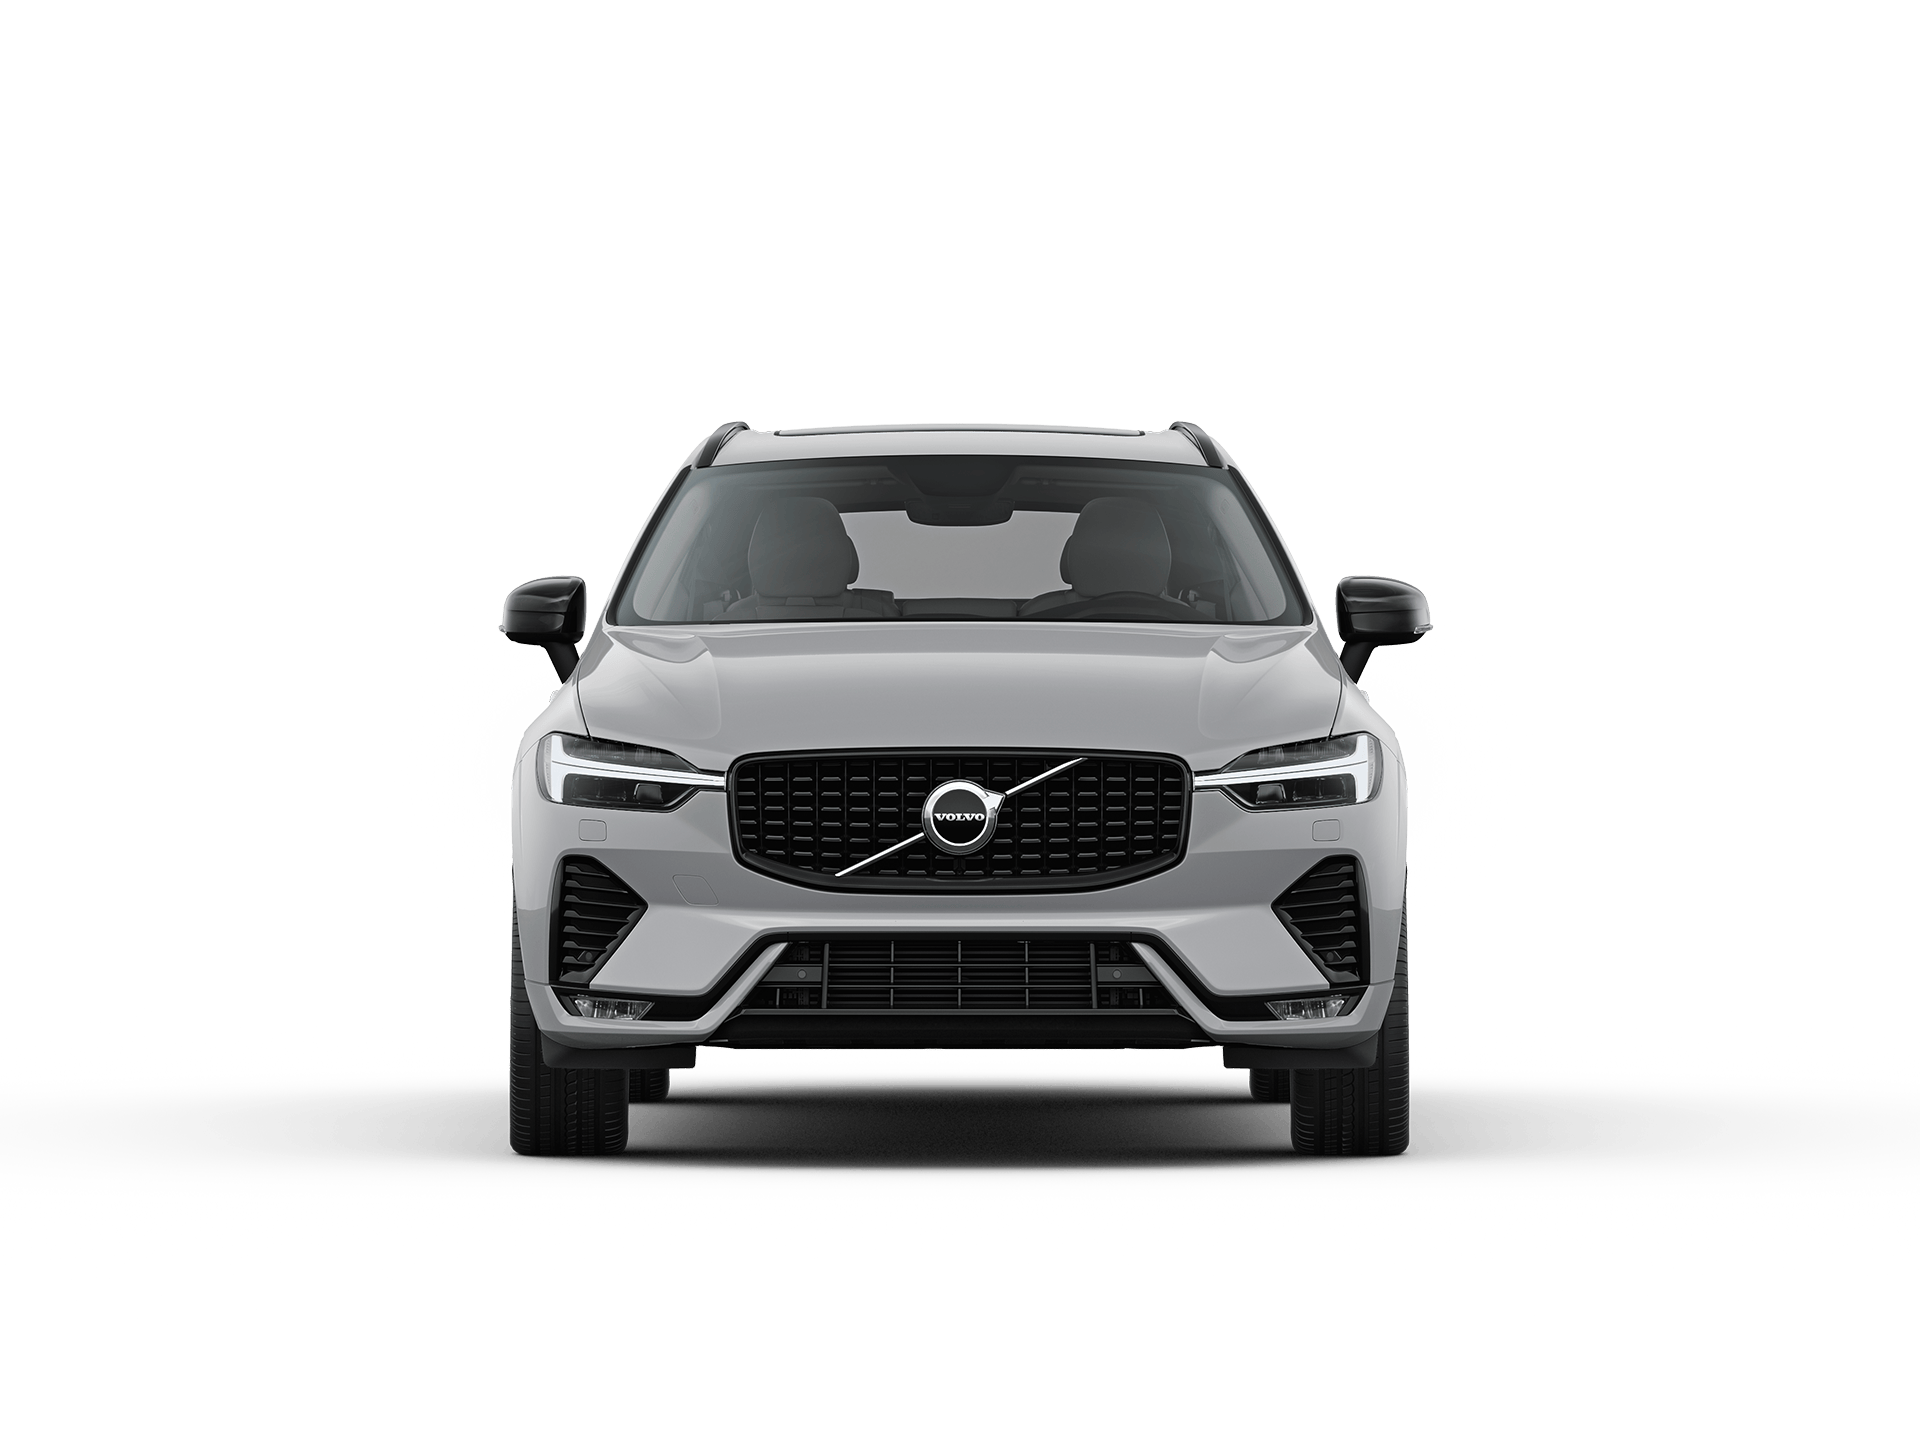 The front of a Volvo XC60 SUV.